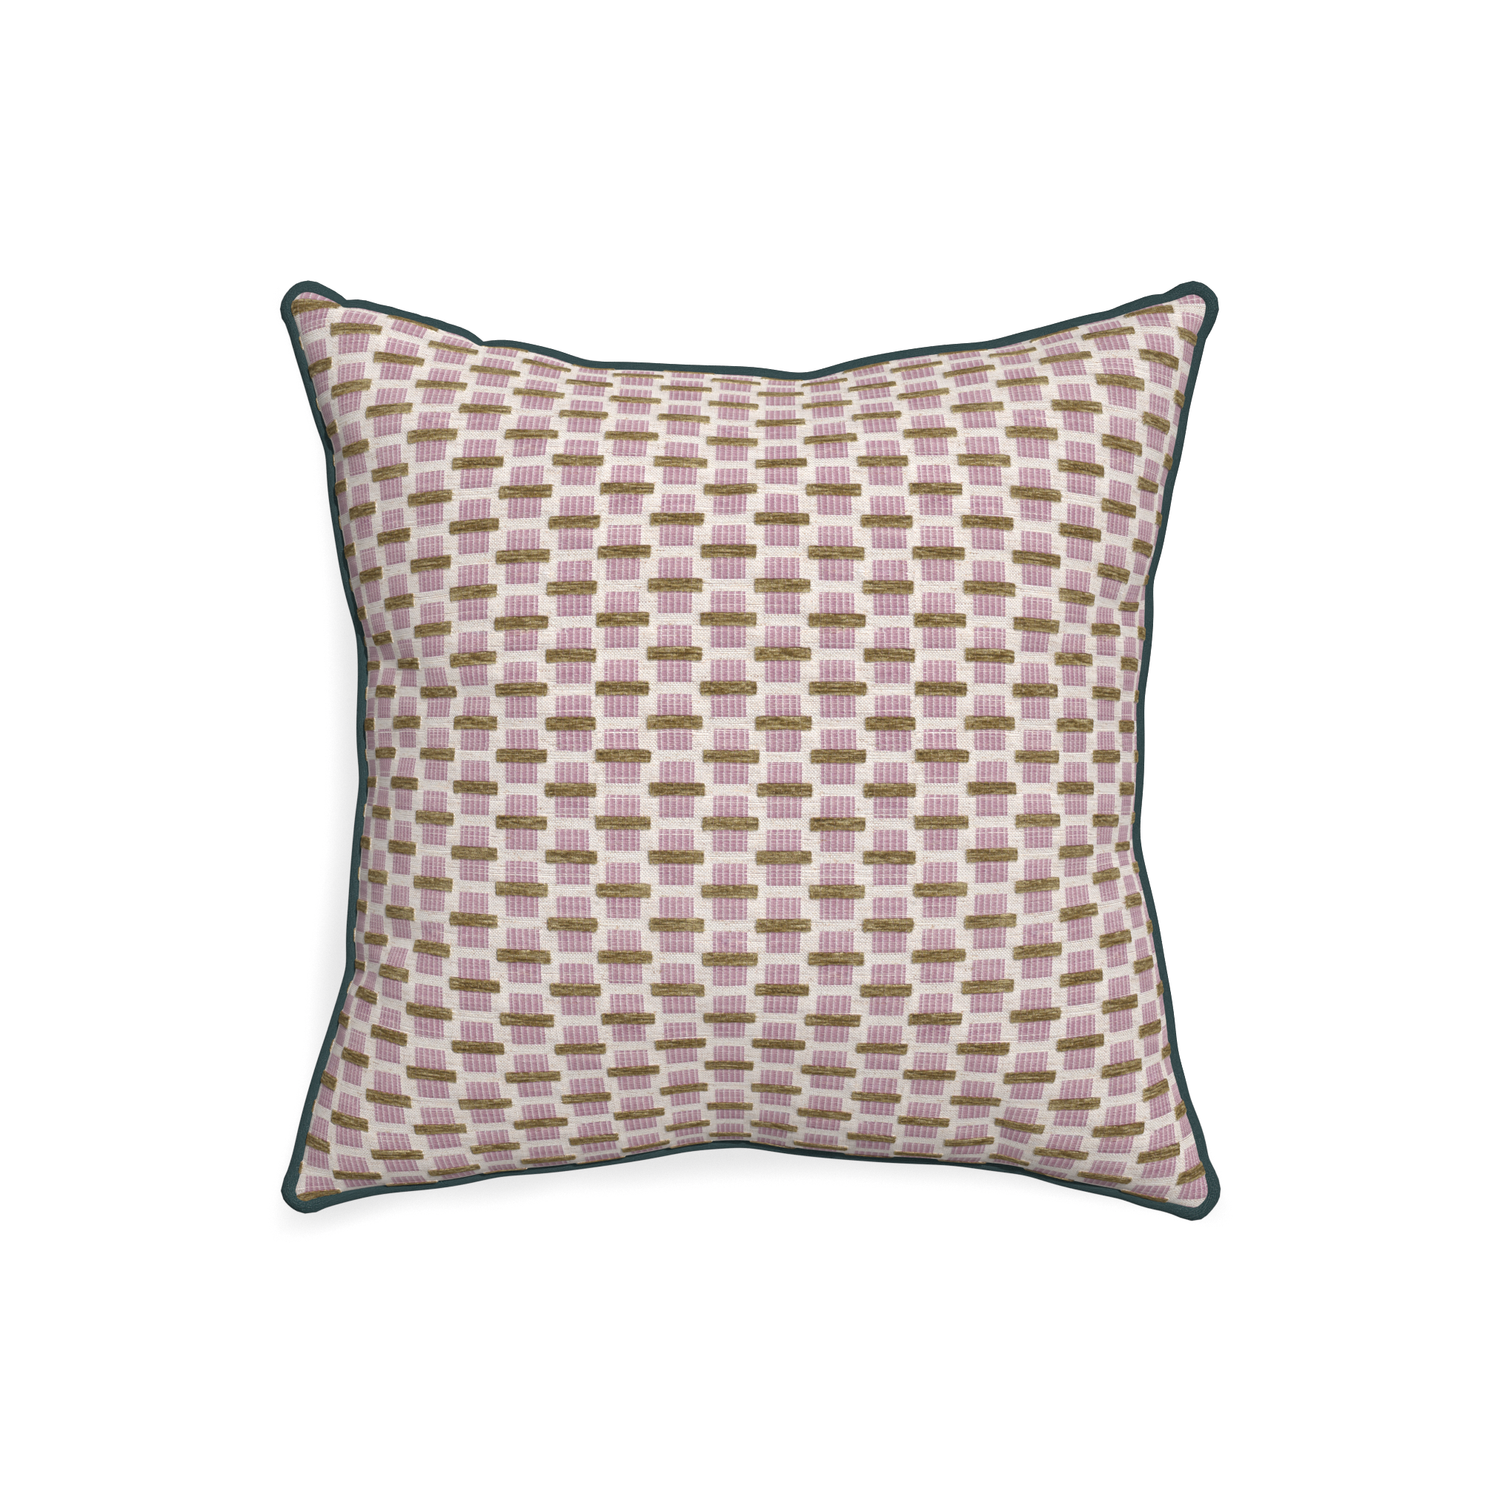 20-square willow orchid custom pink geometric chenillepillow with p piping on white background